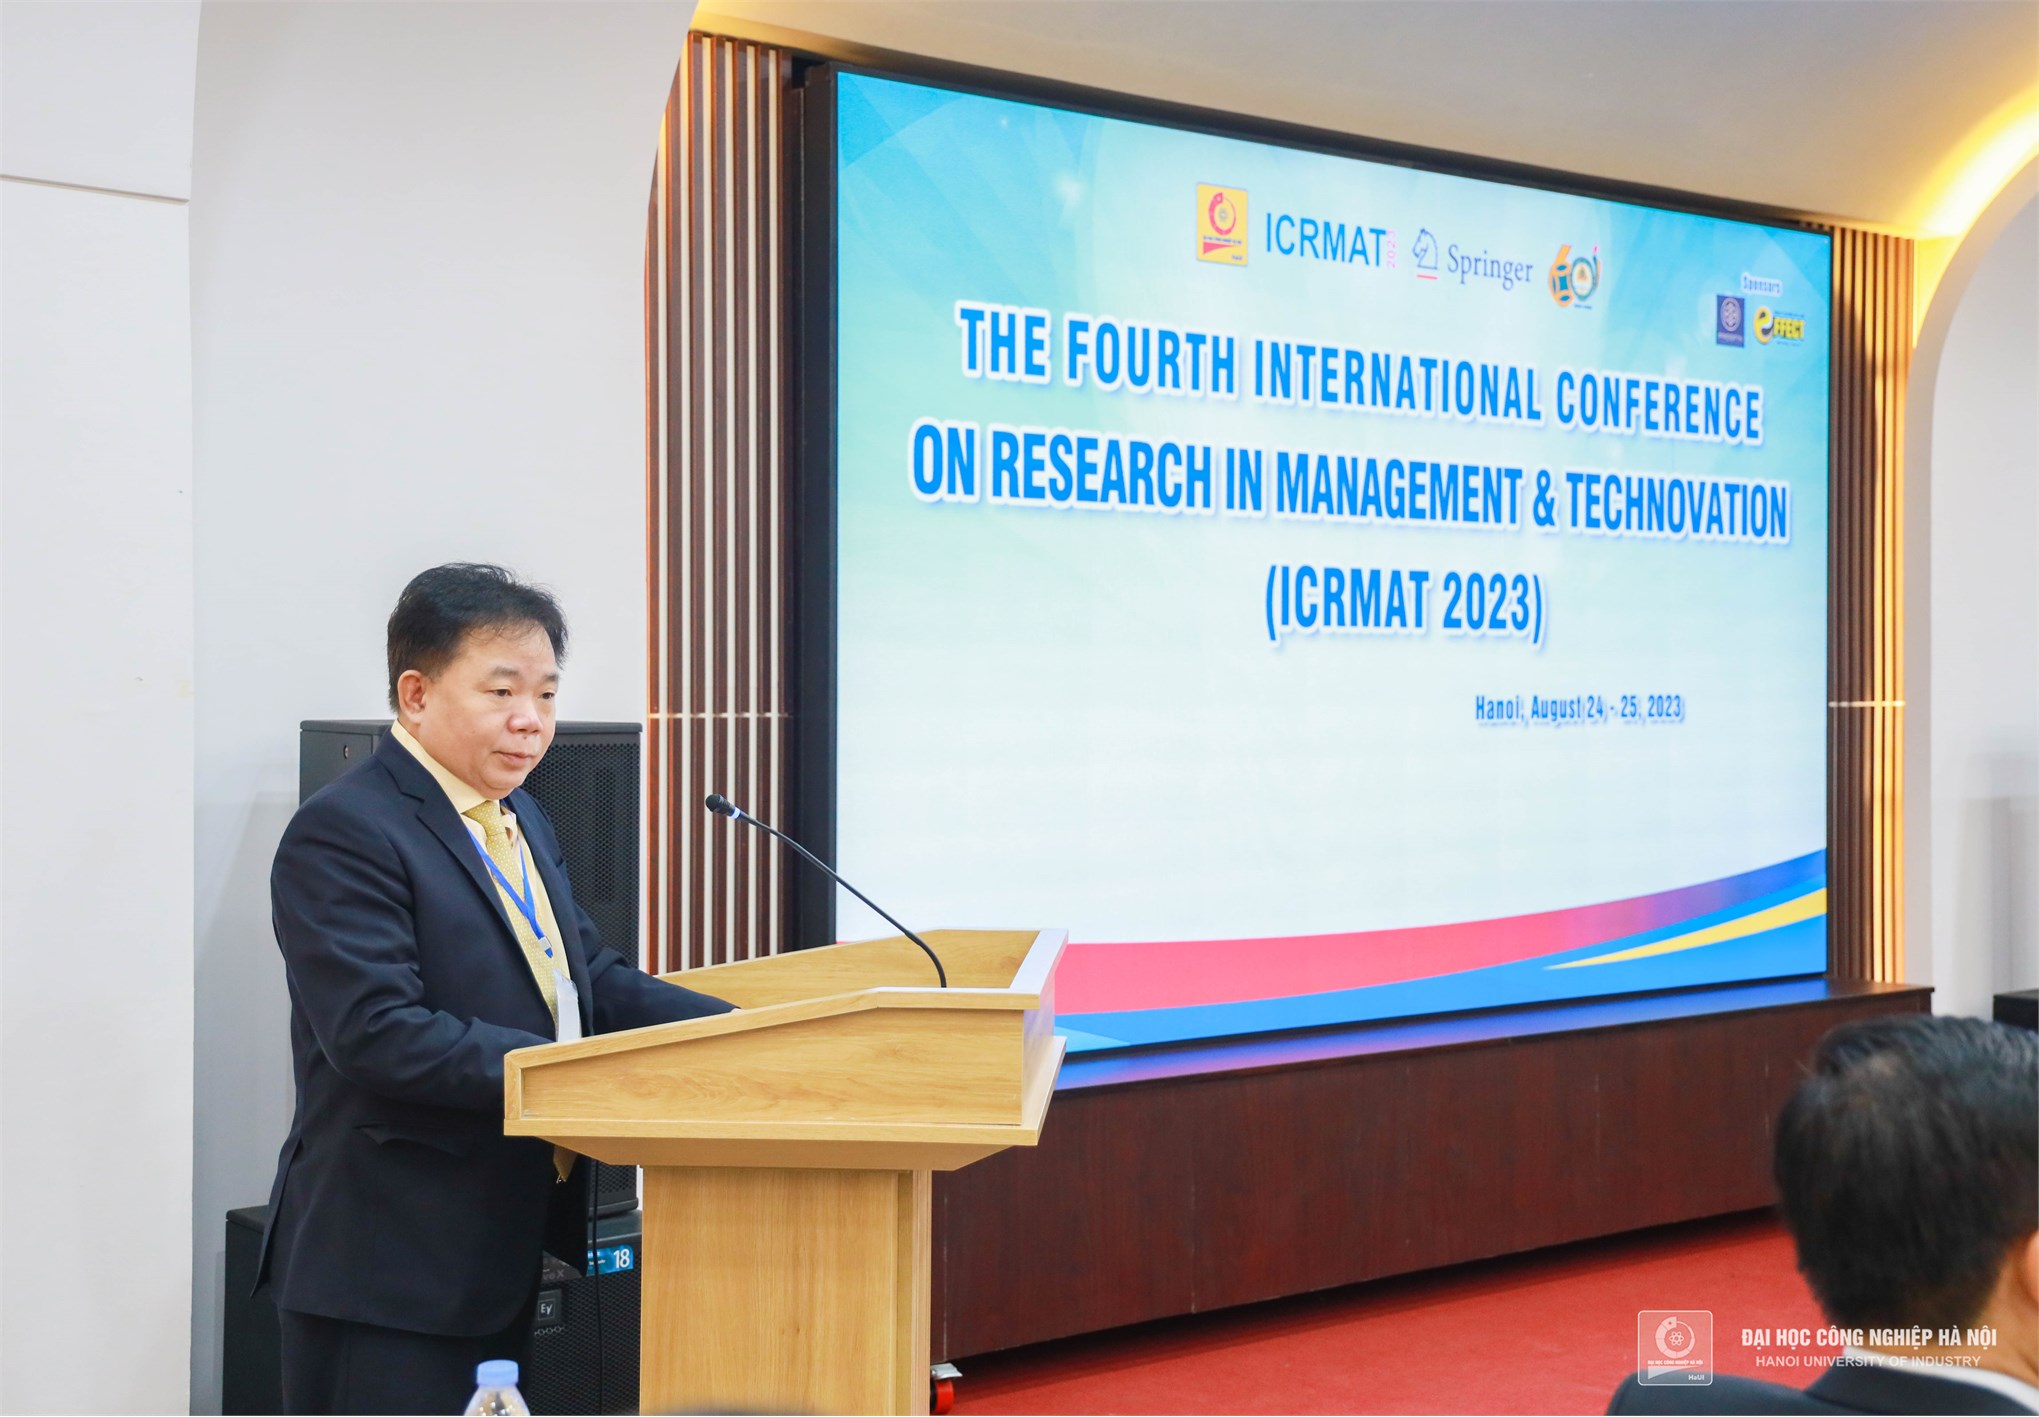 ICRMAT 2023: Promoting Innovative Technology Solutions